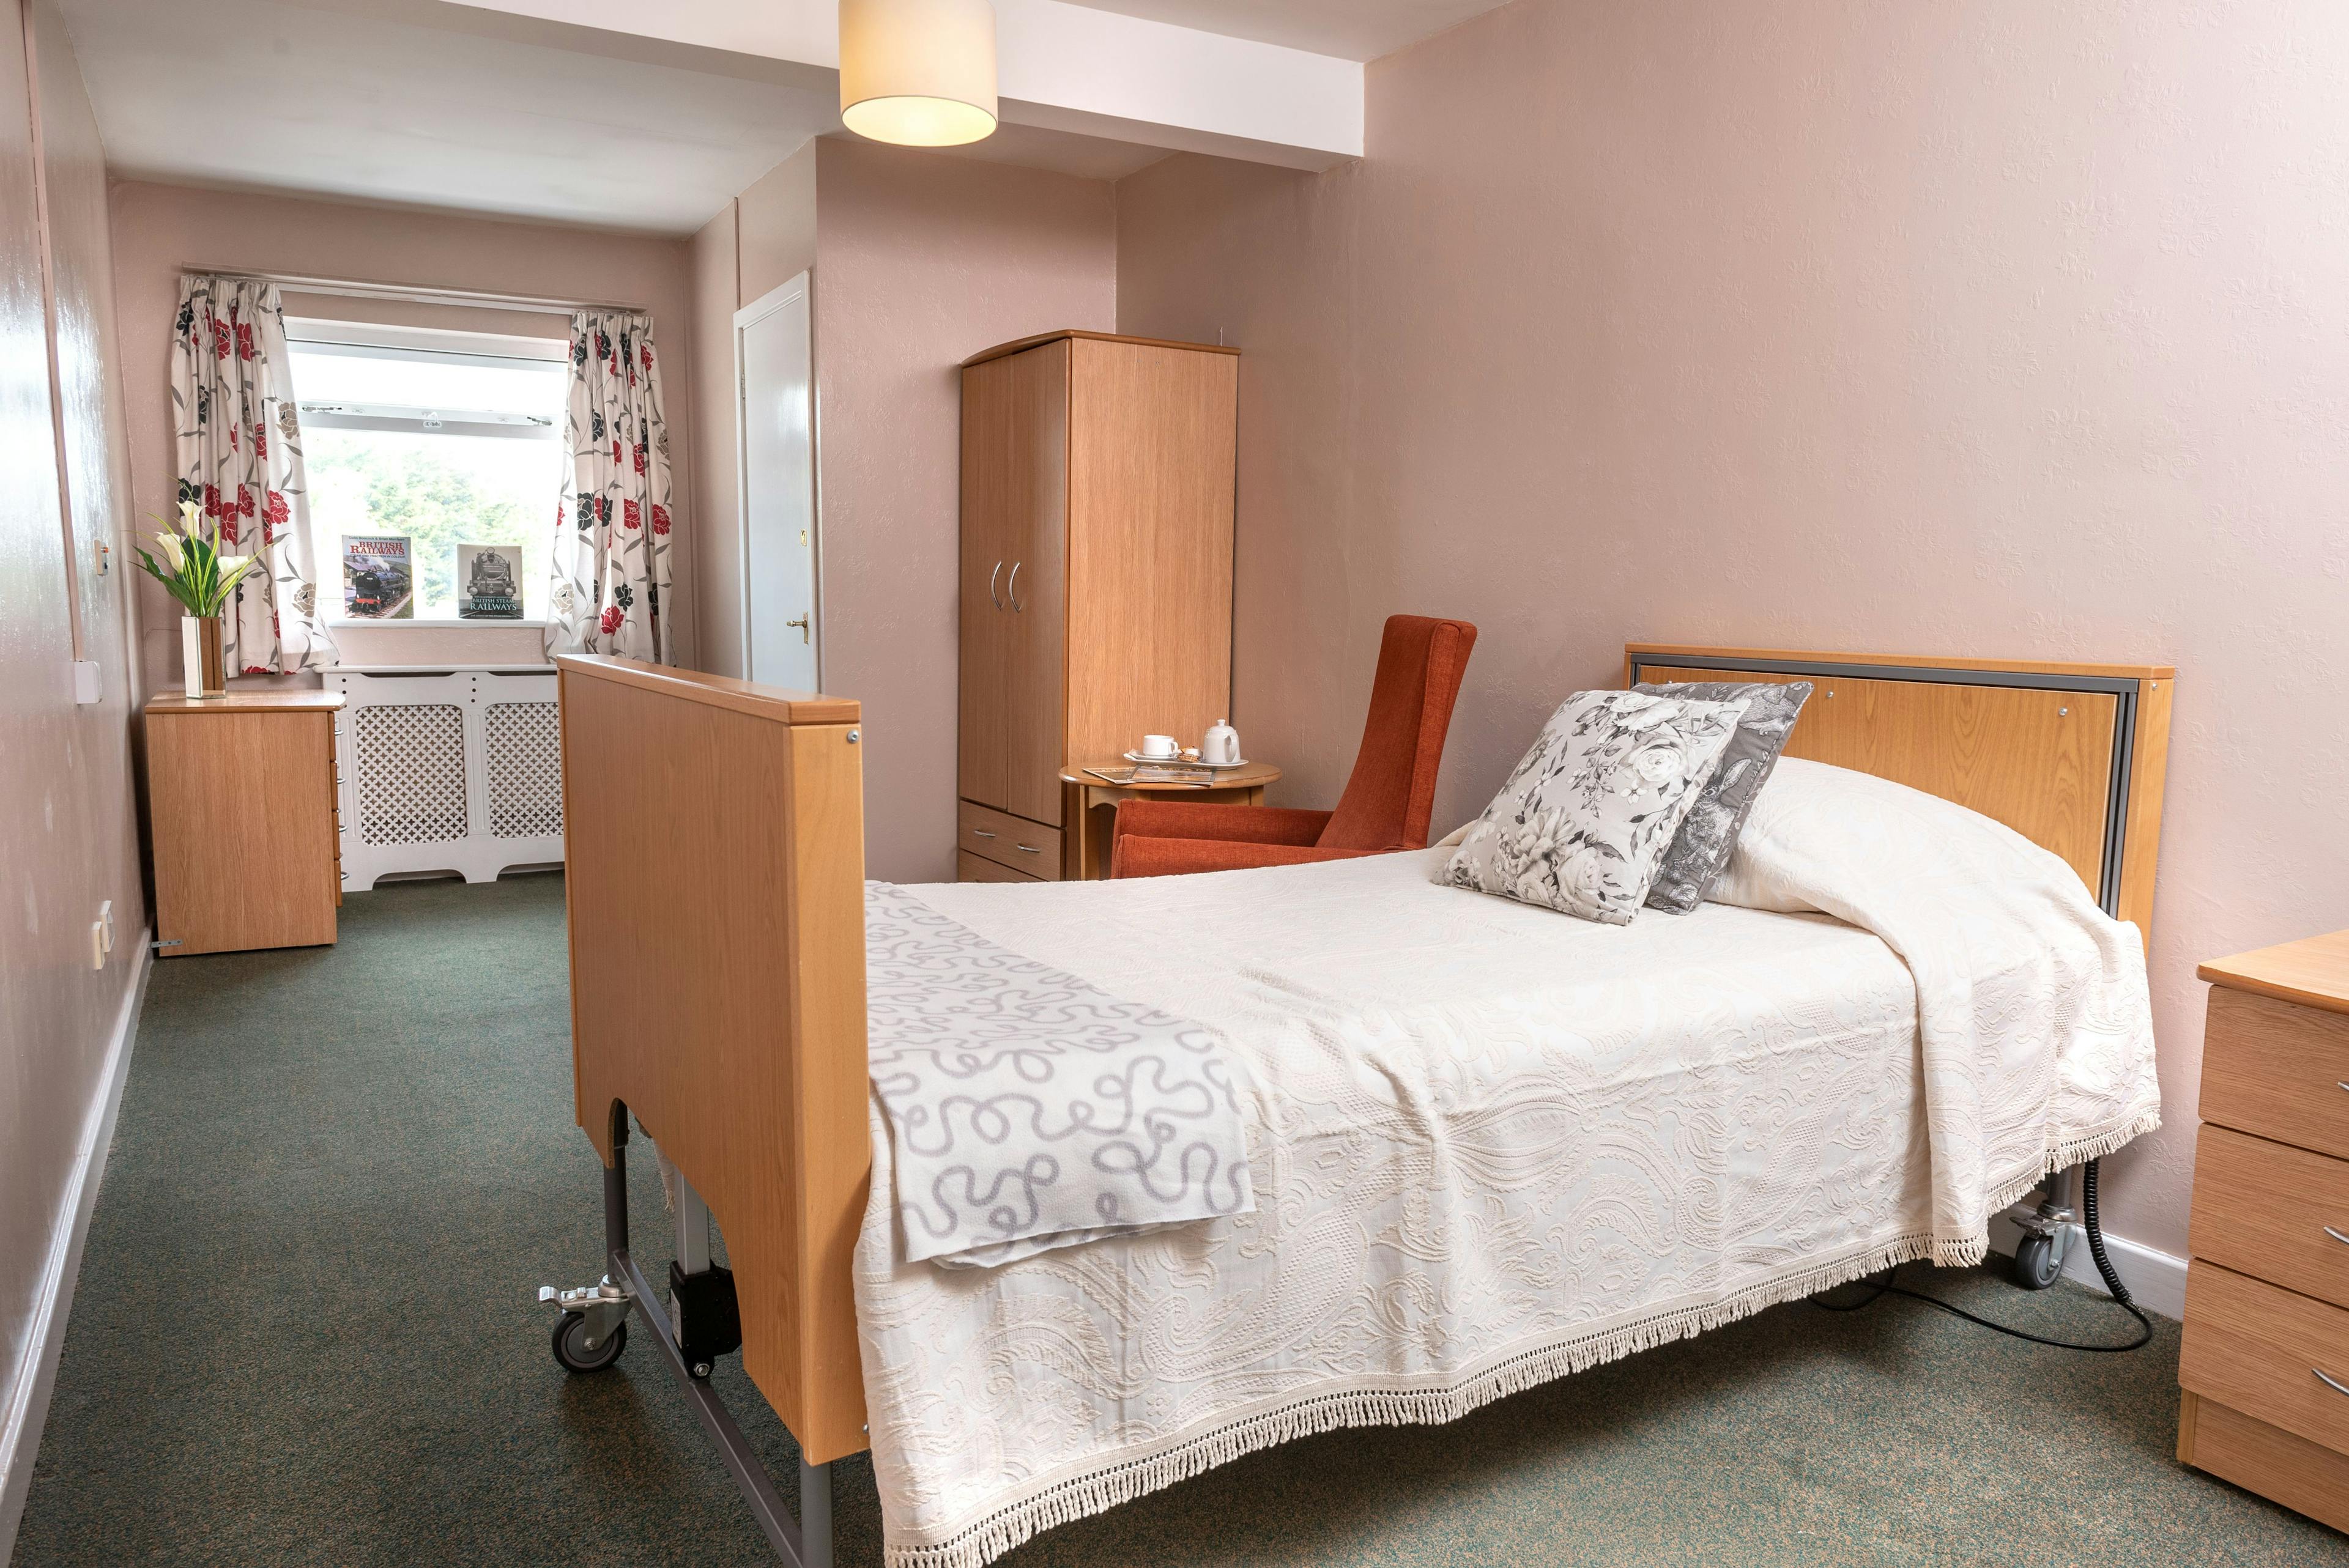 Bedroom of Belmont Lodge care home in Chigwell, Essex